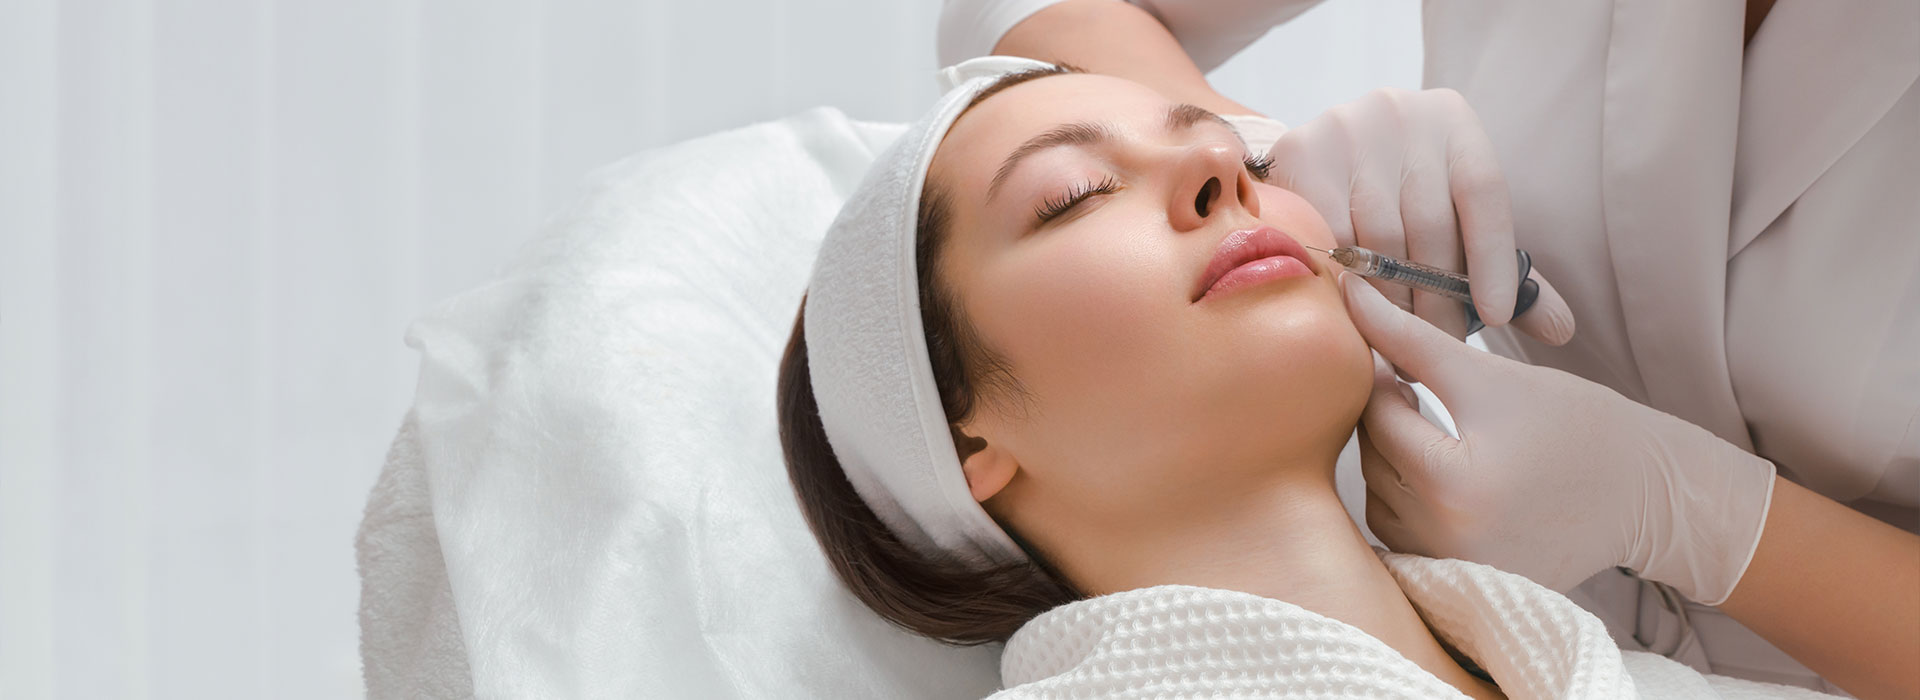 Hyaluronic fillers